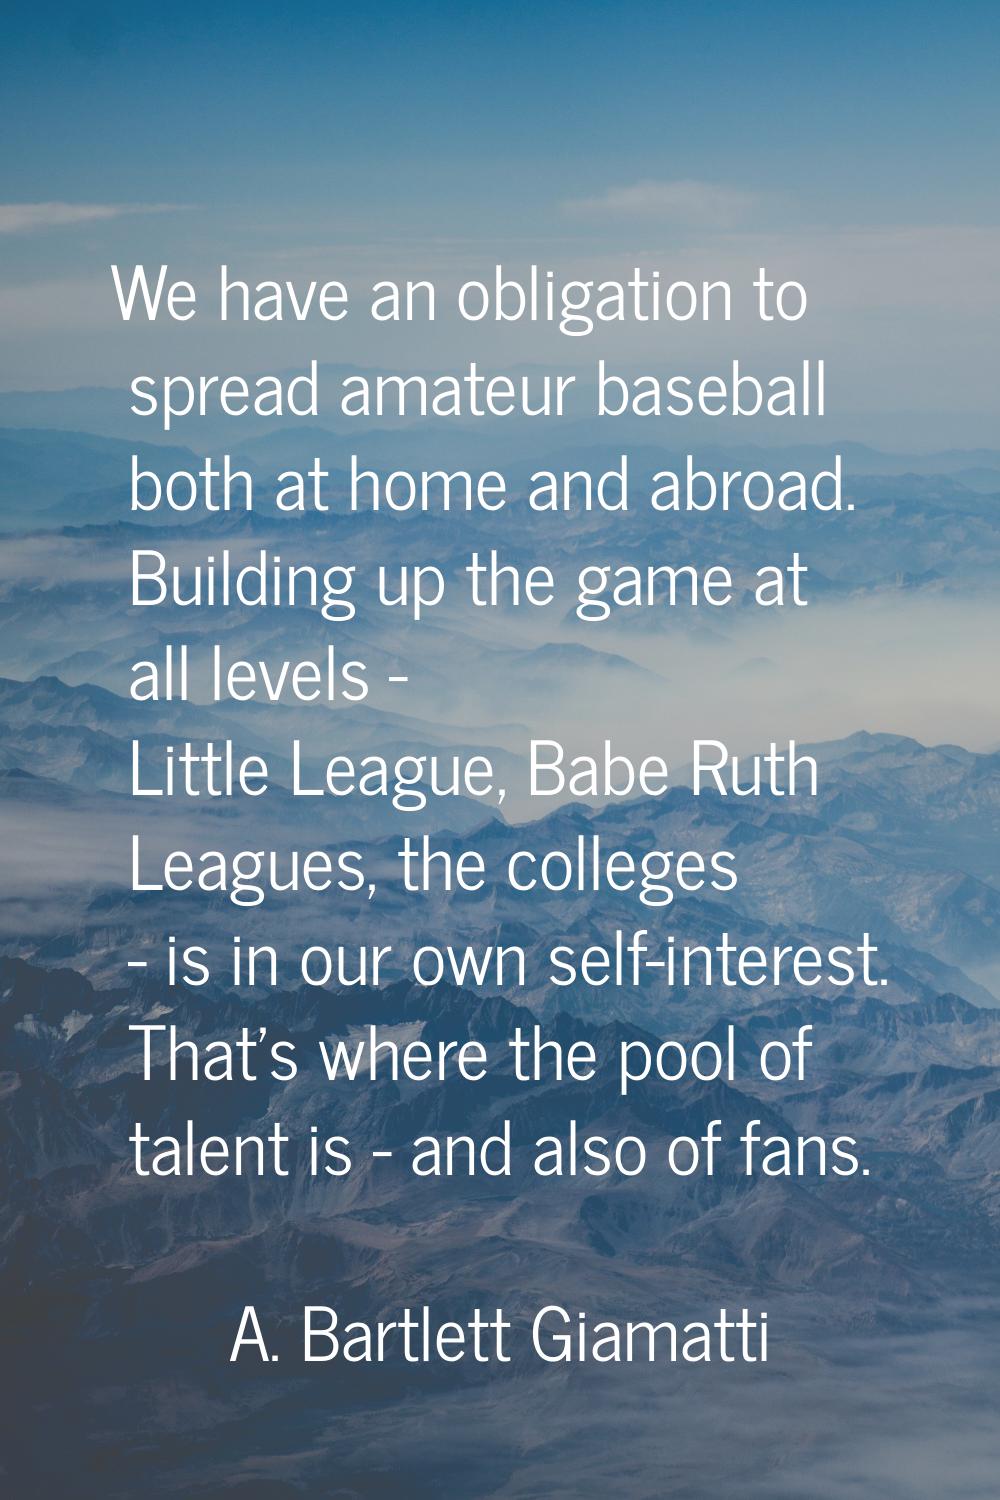 We have an obligation to spread amateur baseball both at home and abroad. Building up the game at a